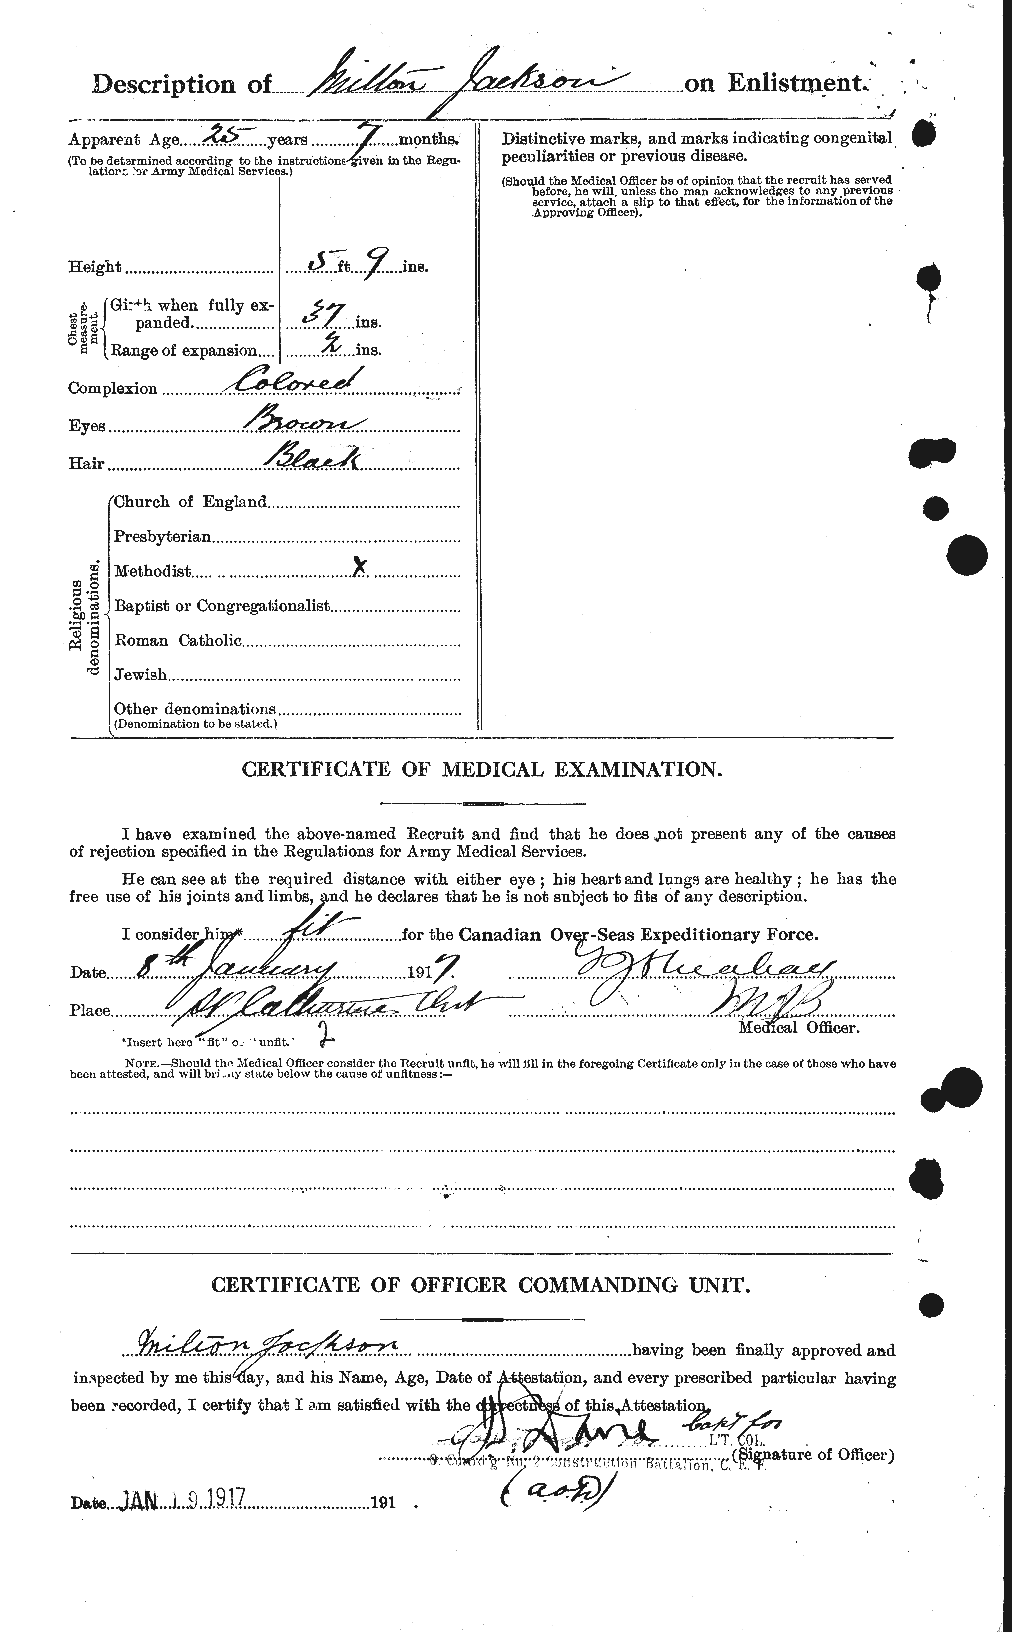 Personnel Records of the First World War - CEF 414432b